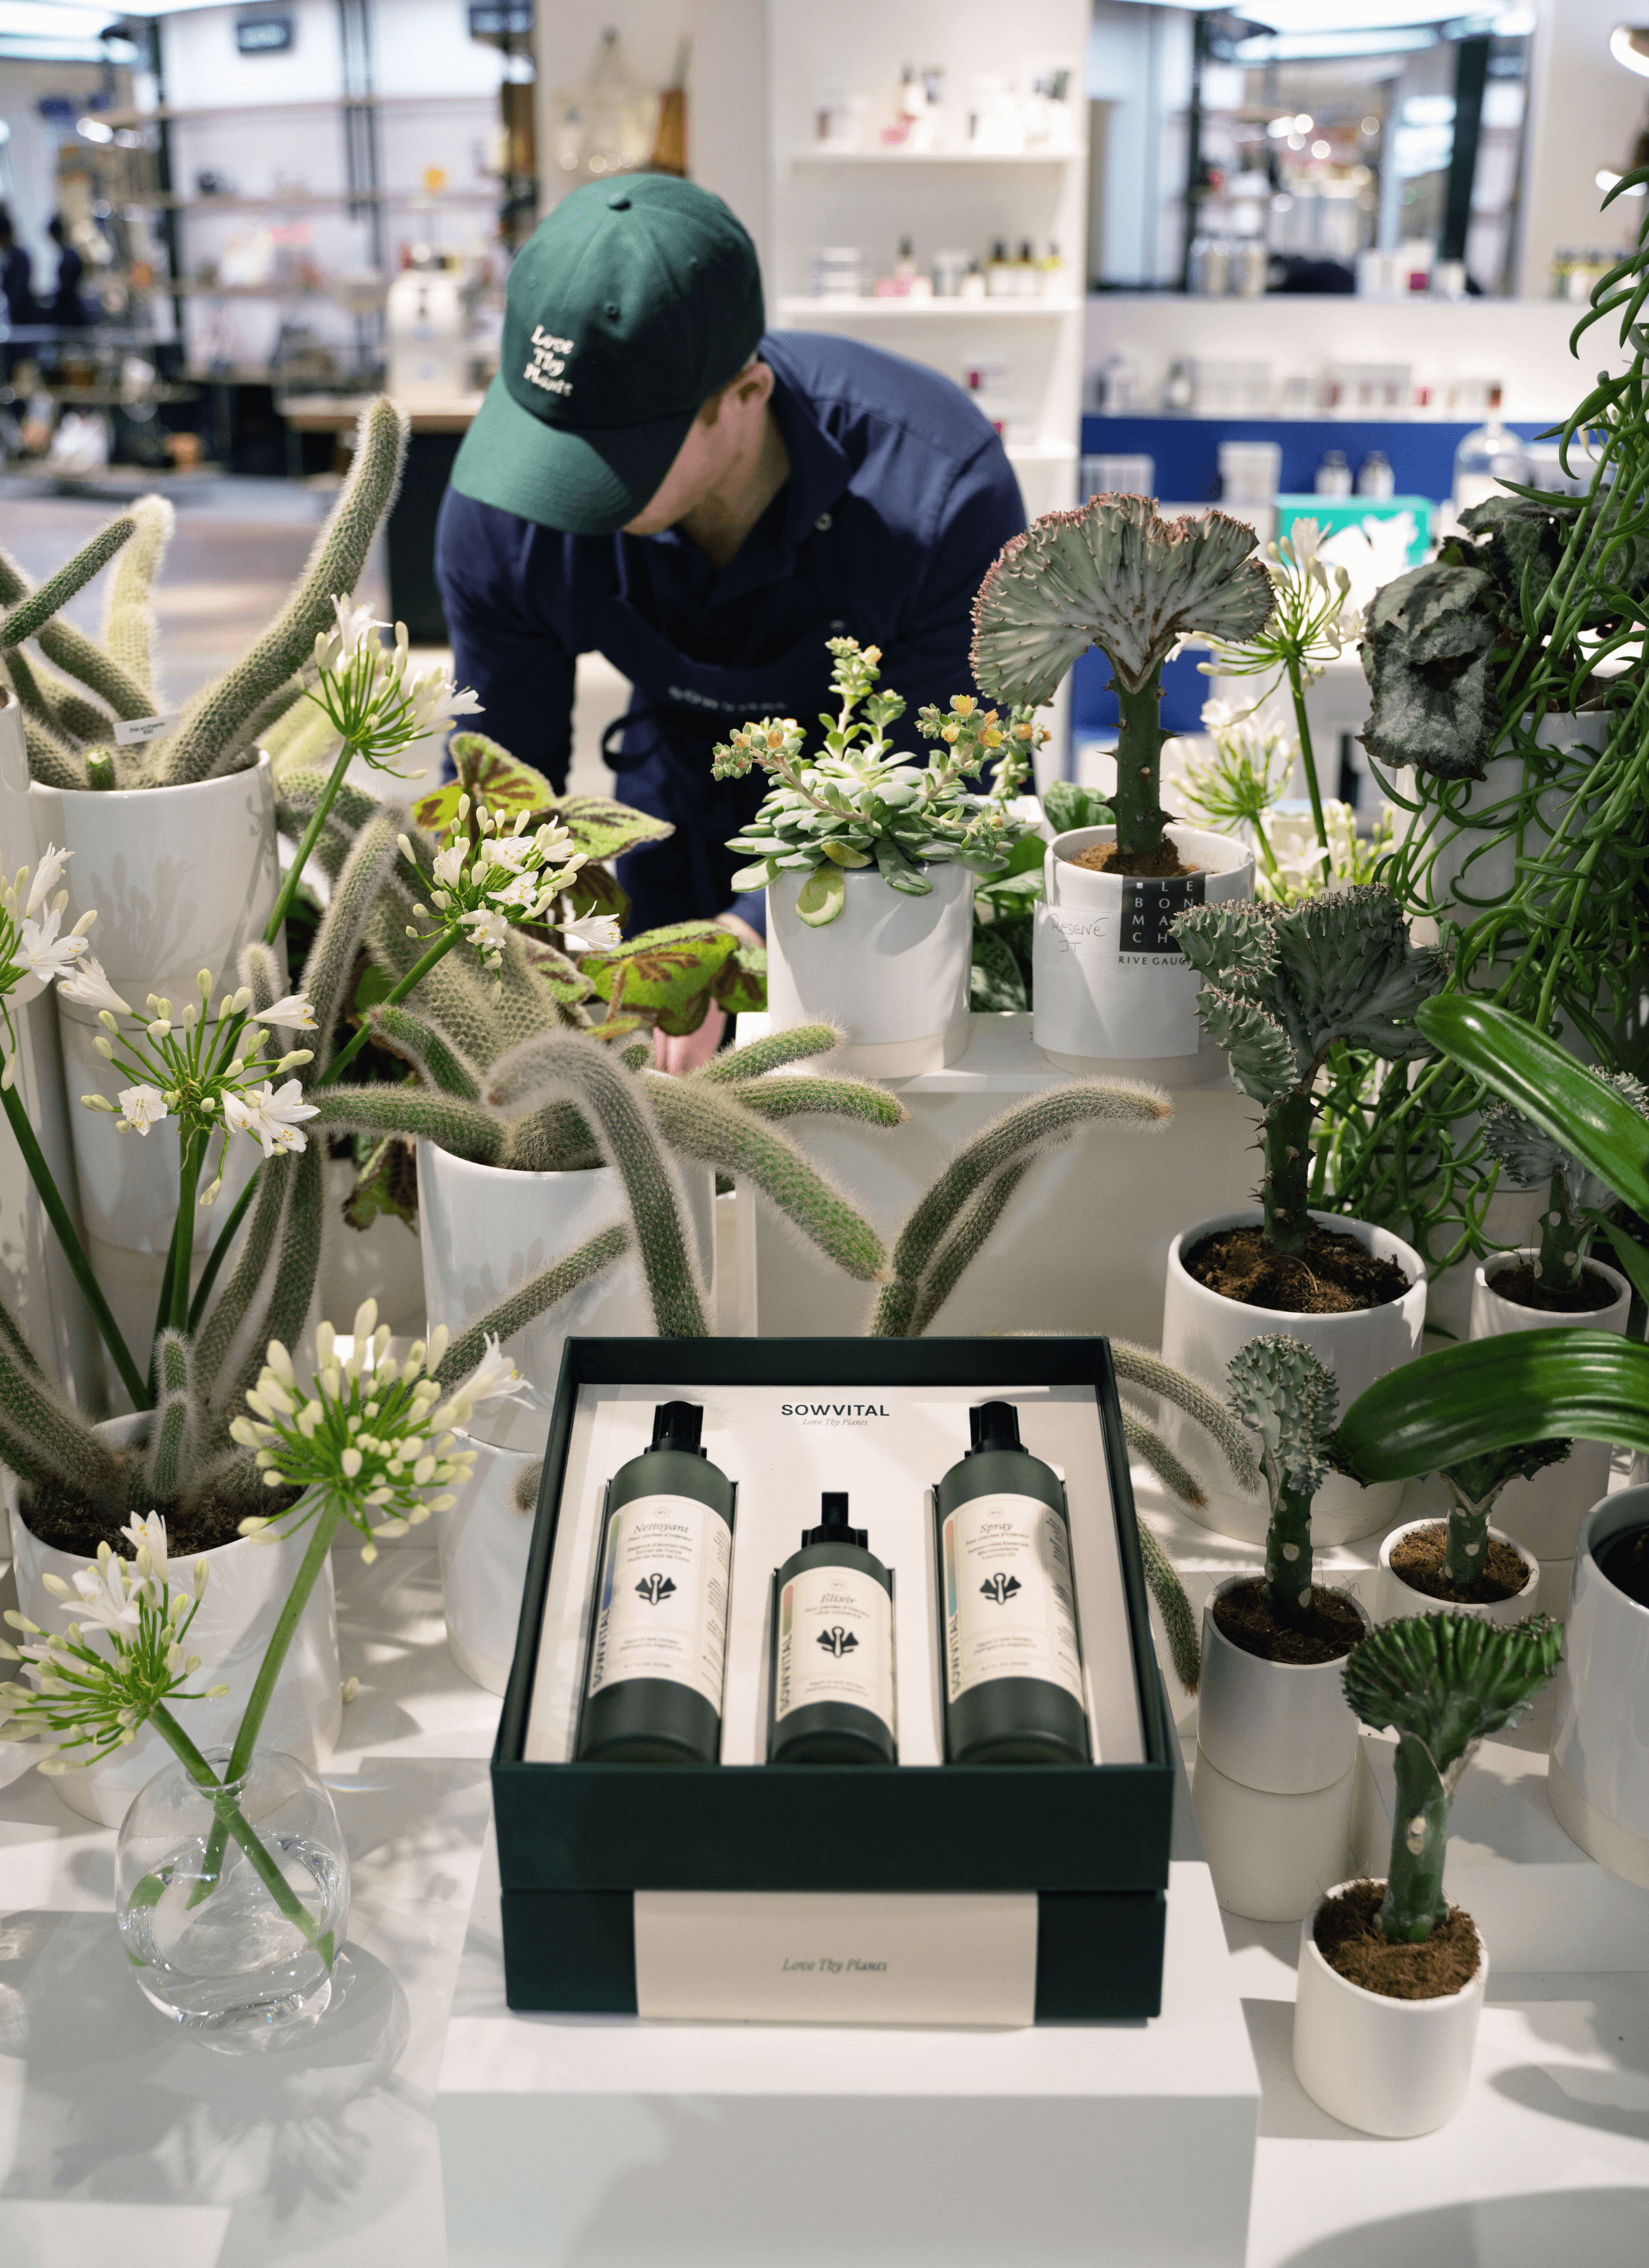 Sowvital's three-step gift set is elegantly showcased on the surface, complemented by a diverse array of potted plants, flowers, and cacti. In the background, a staff member wearing a green Love Thy Plants cap and a black apron attentively tends to the display, ensuring its beauty and vitality.